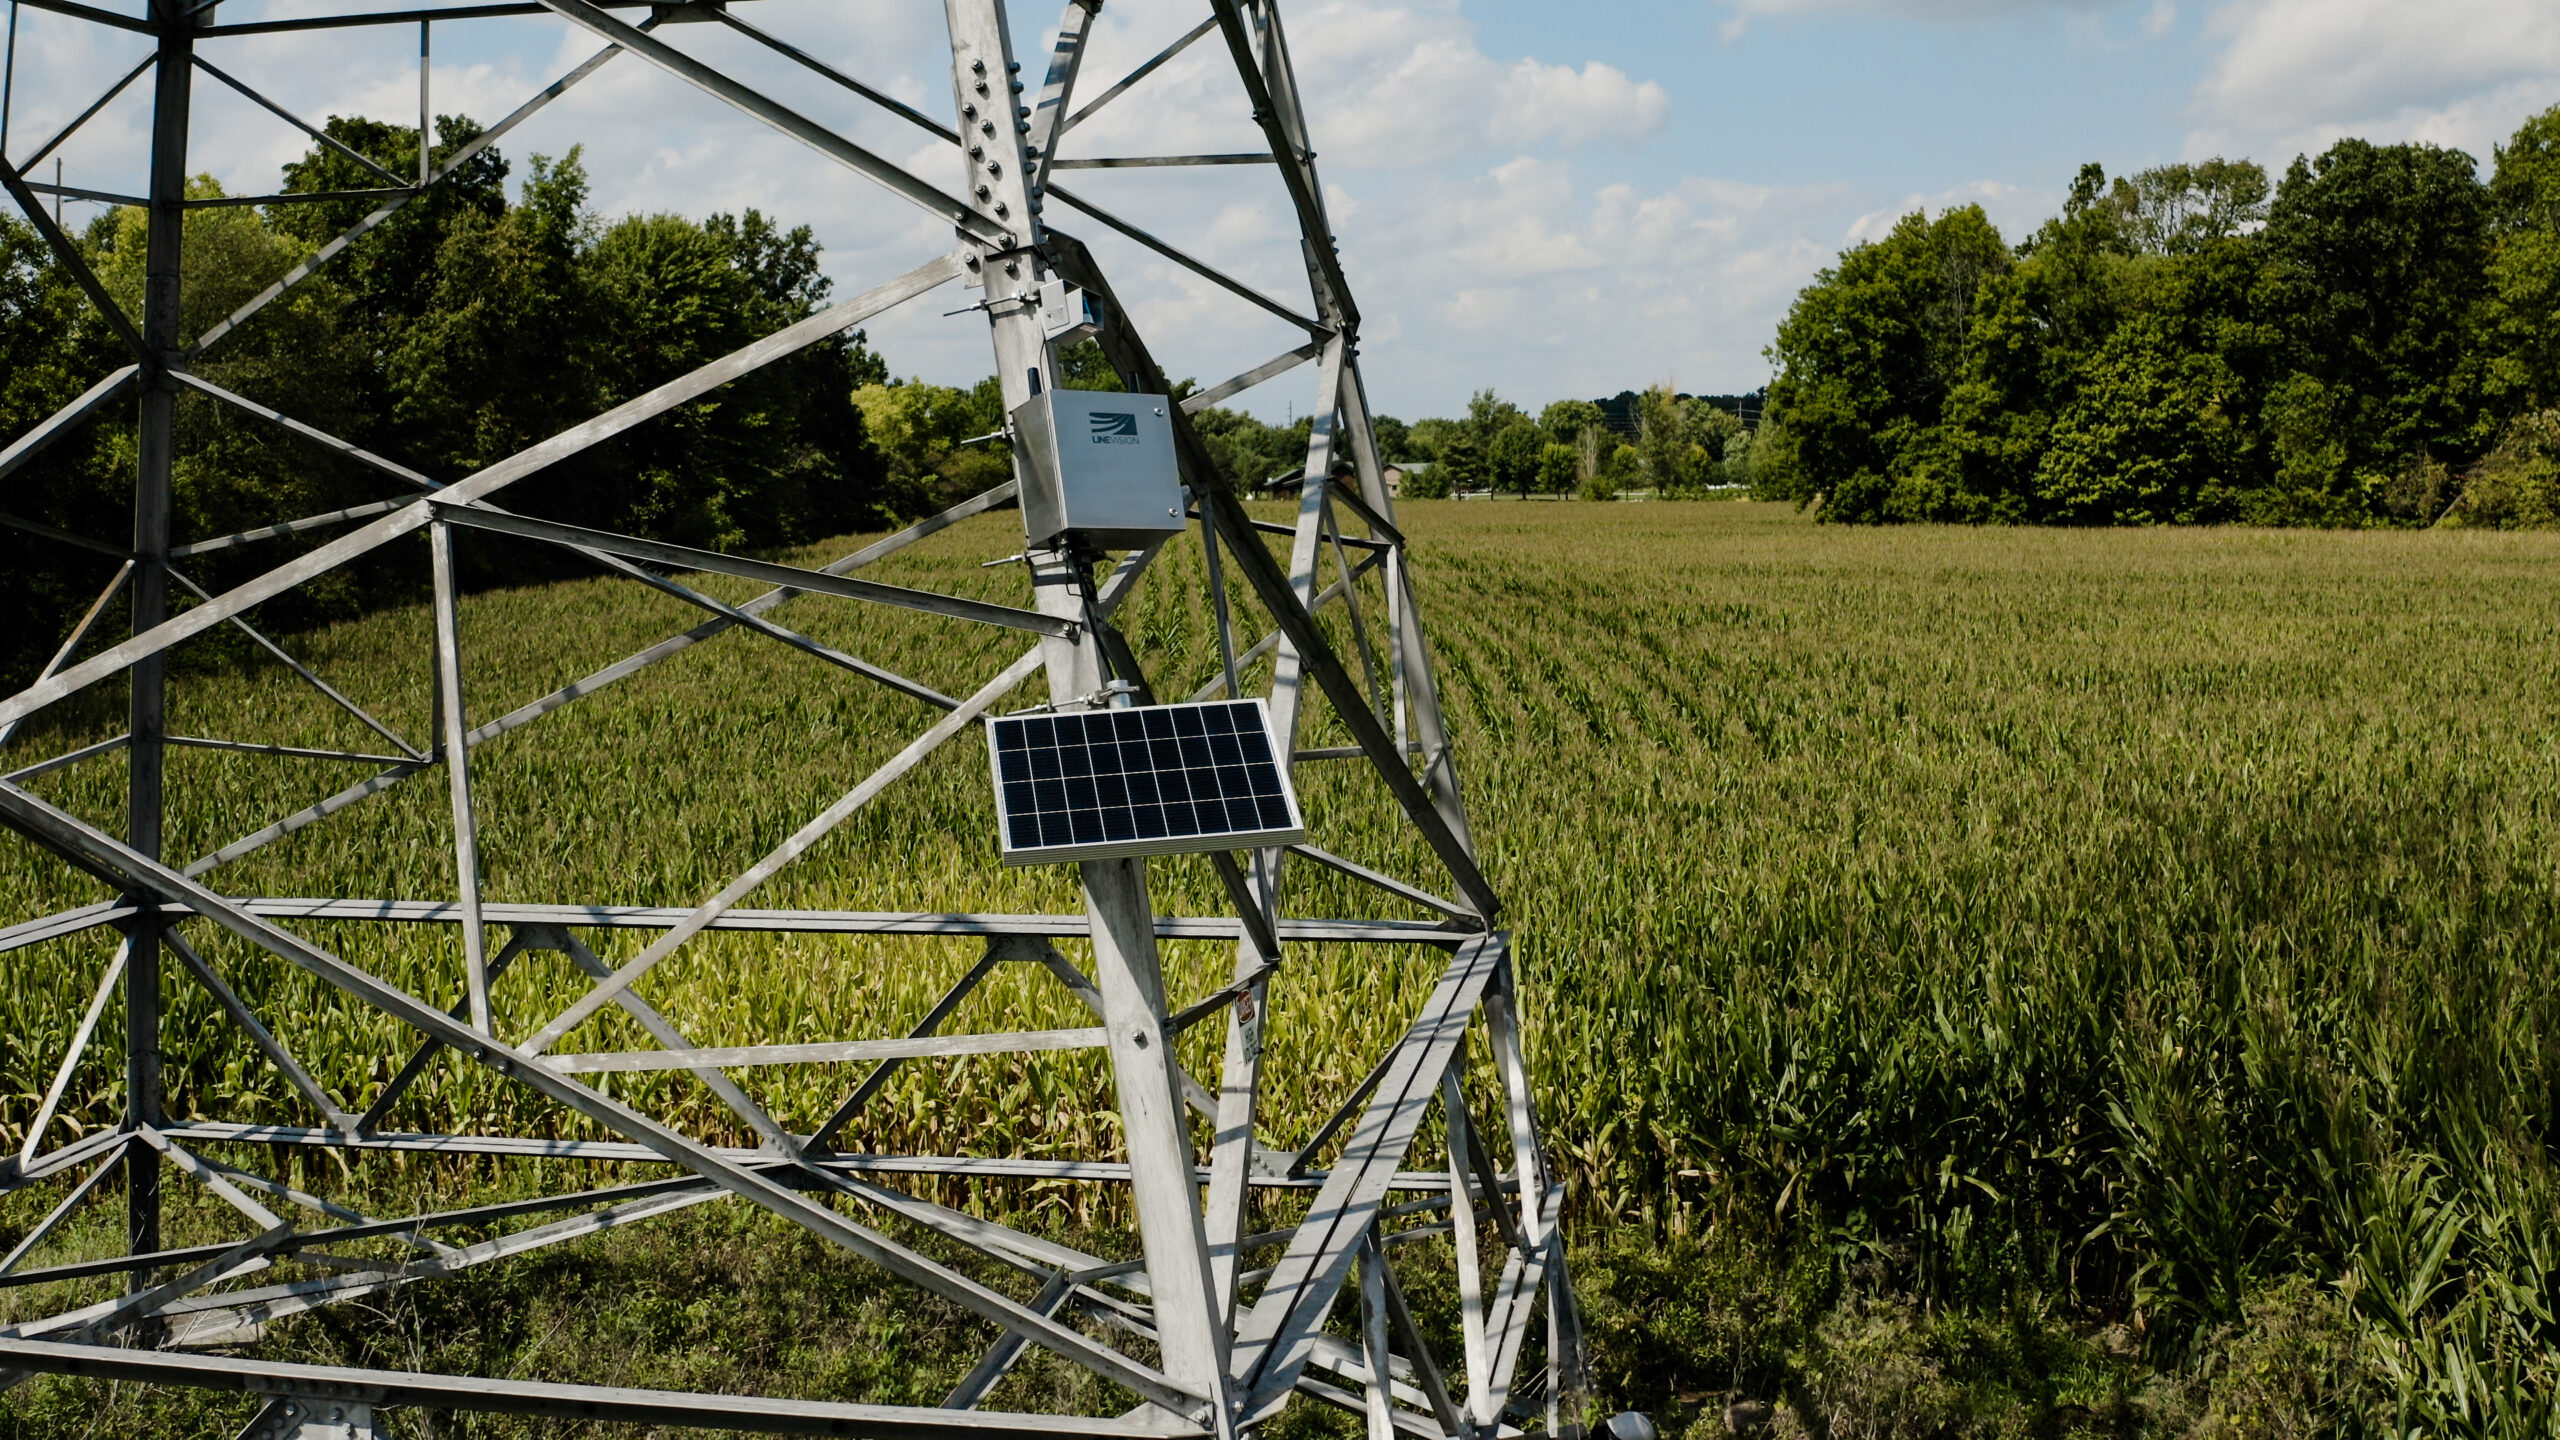 A solar panel powered-sensor sits on a power line in an agricultural field.